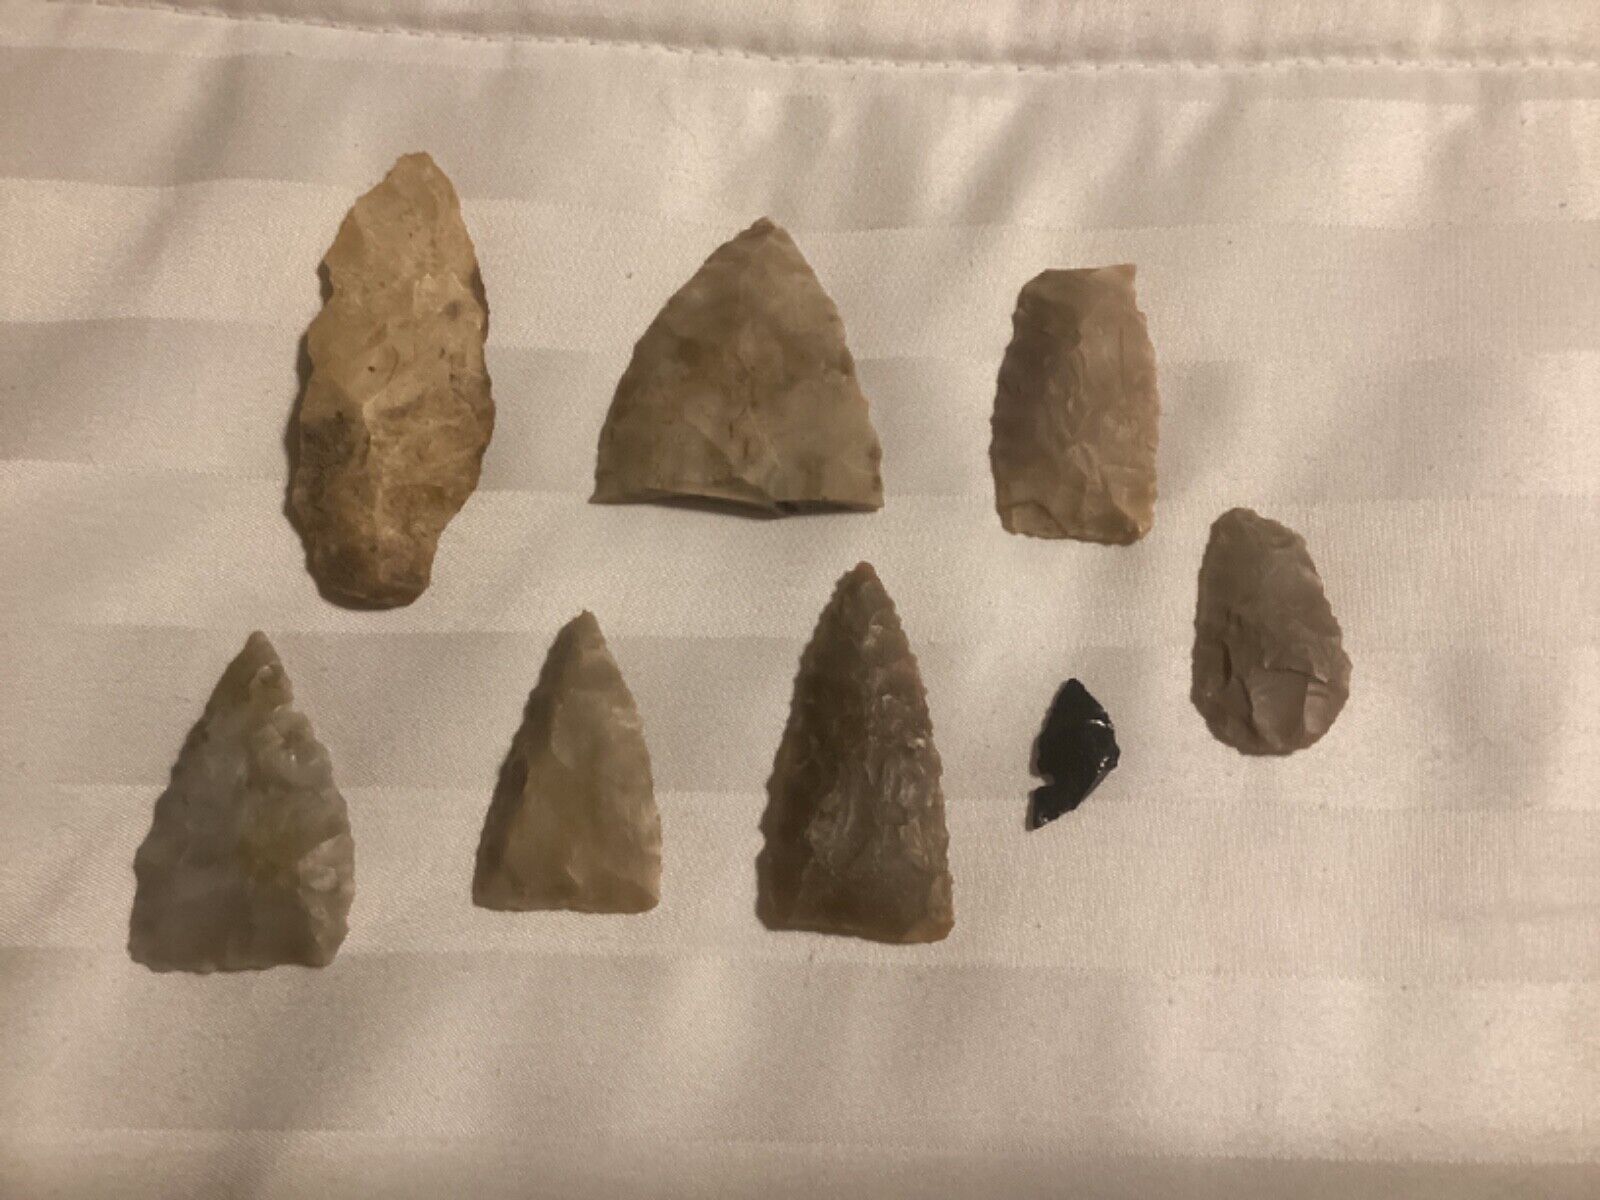 Texas Arrowheads Artifacts authentic and found by me